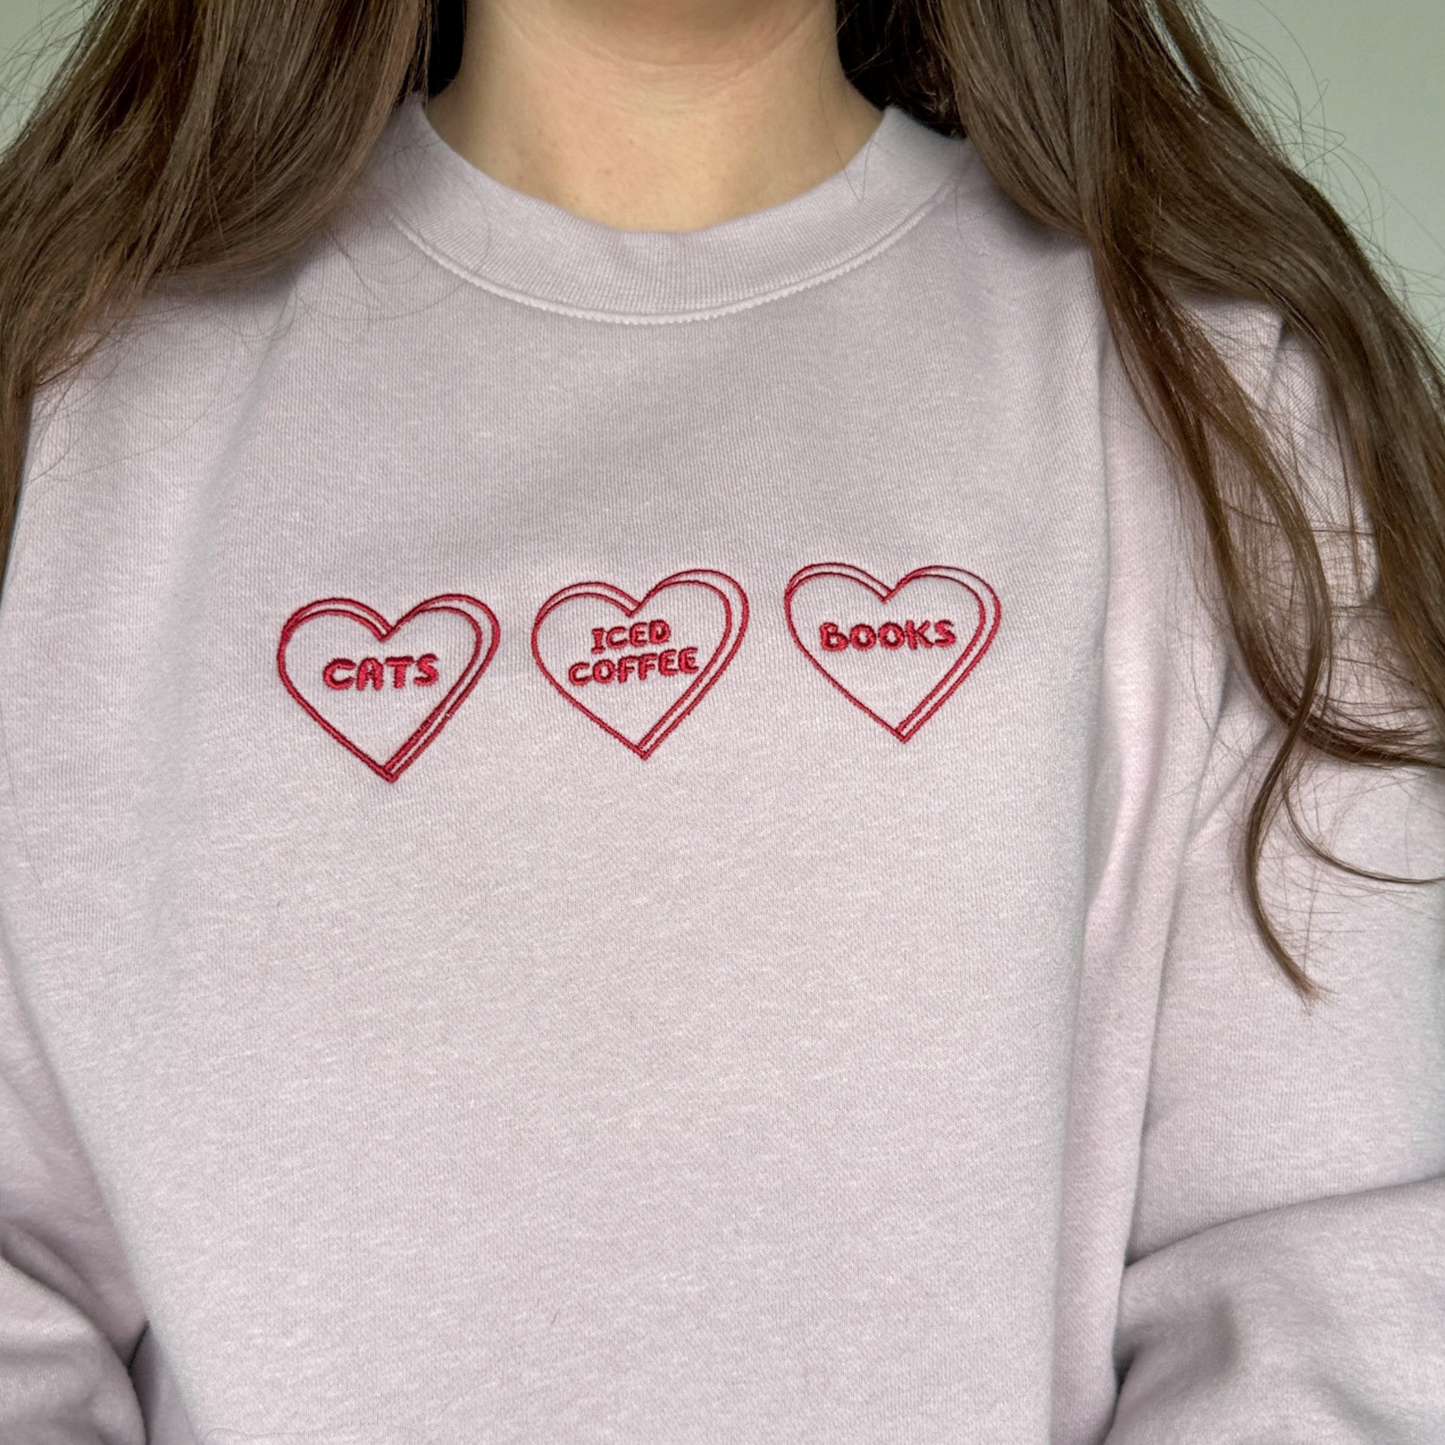 Cats, Iced Coffee, Books Candy Heart Embroidered Crewneck